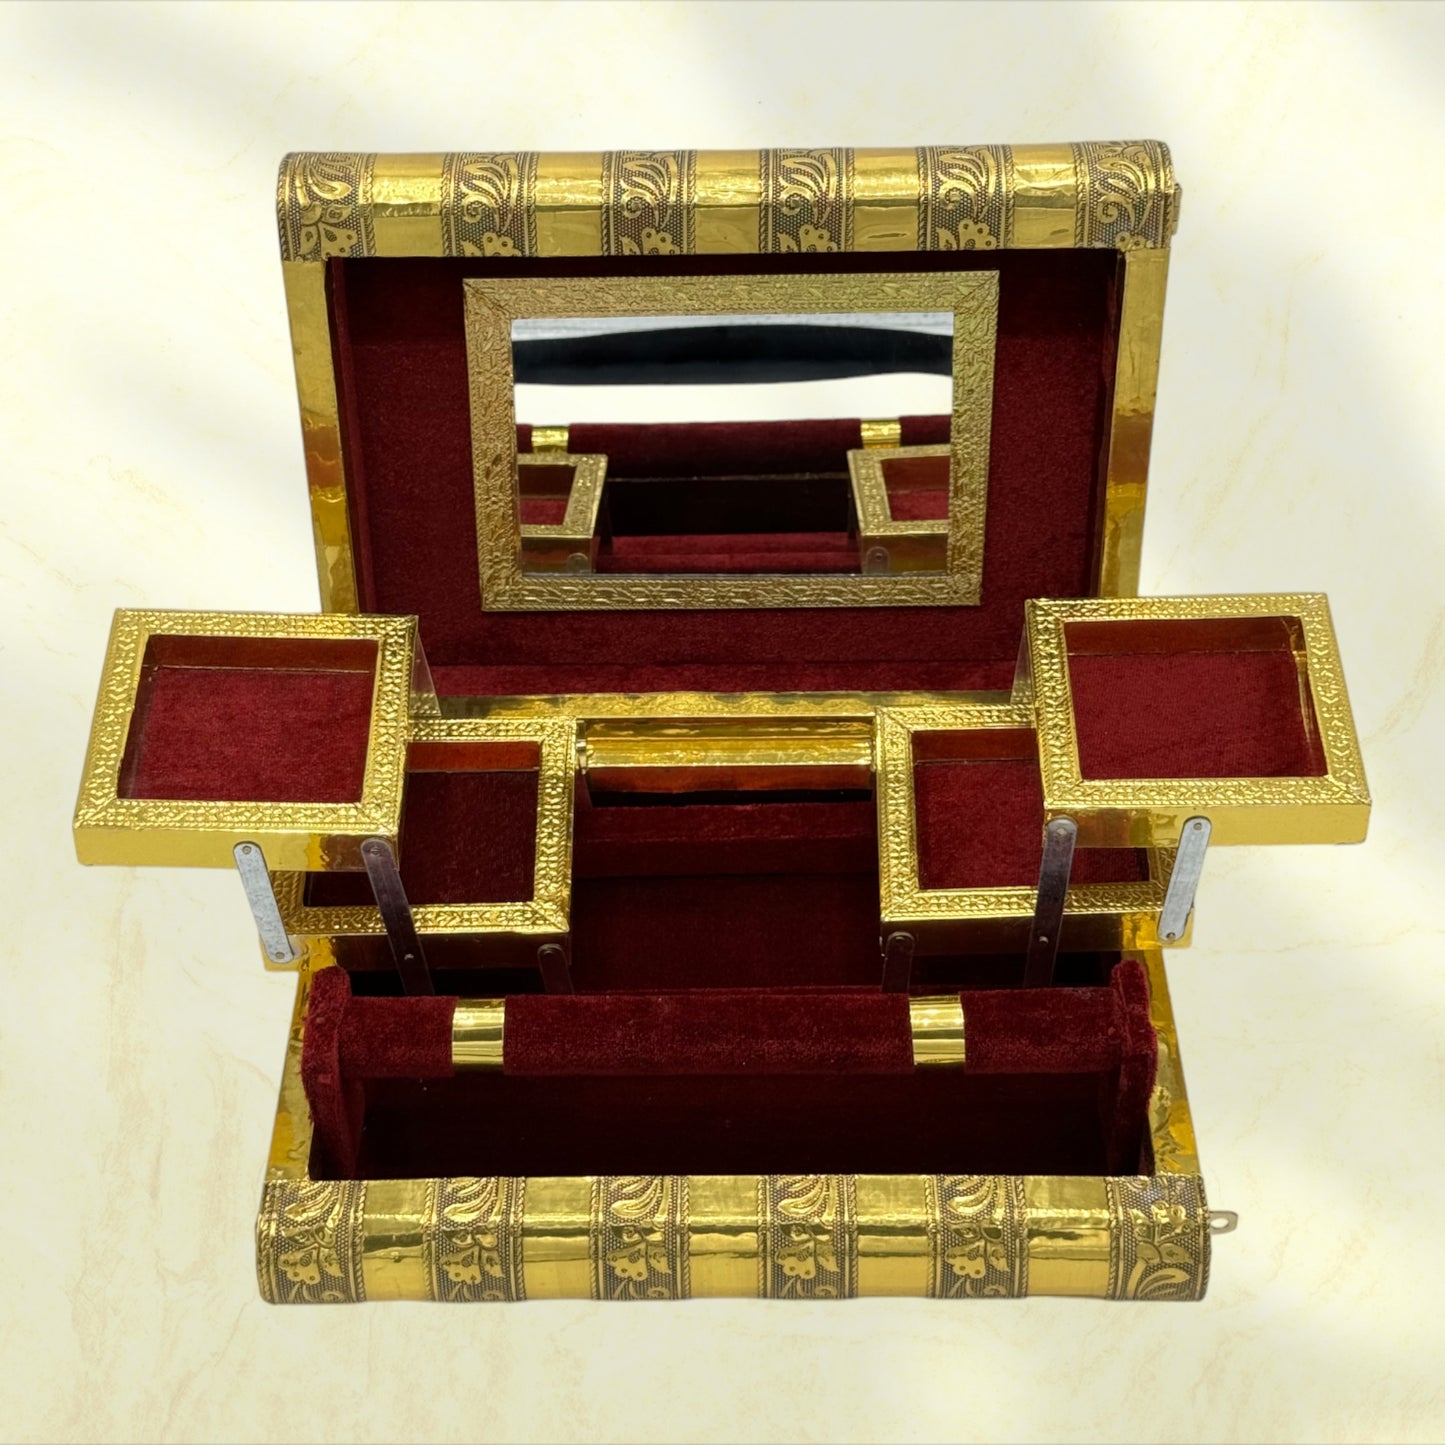 Majestic Indian Tiger Handmade Jewelry Holder Box - Tortuna shows red box open with trays extended 